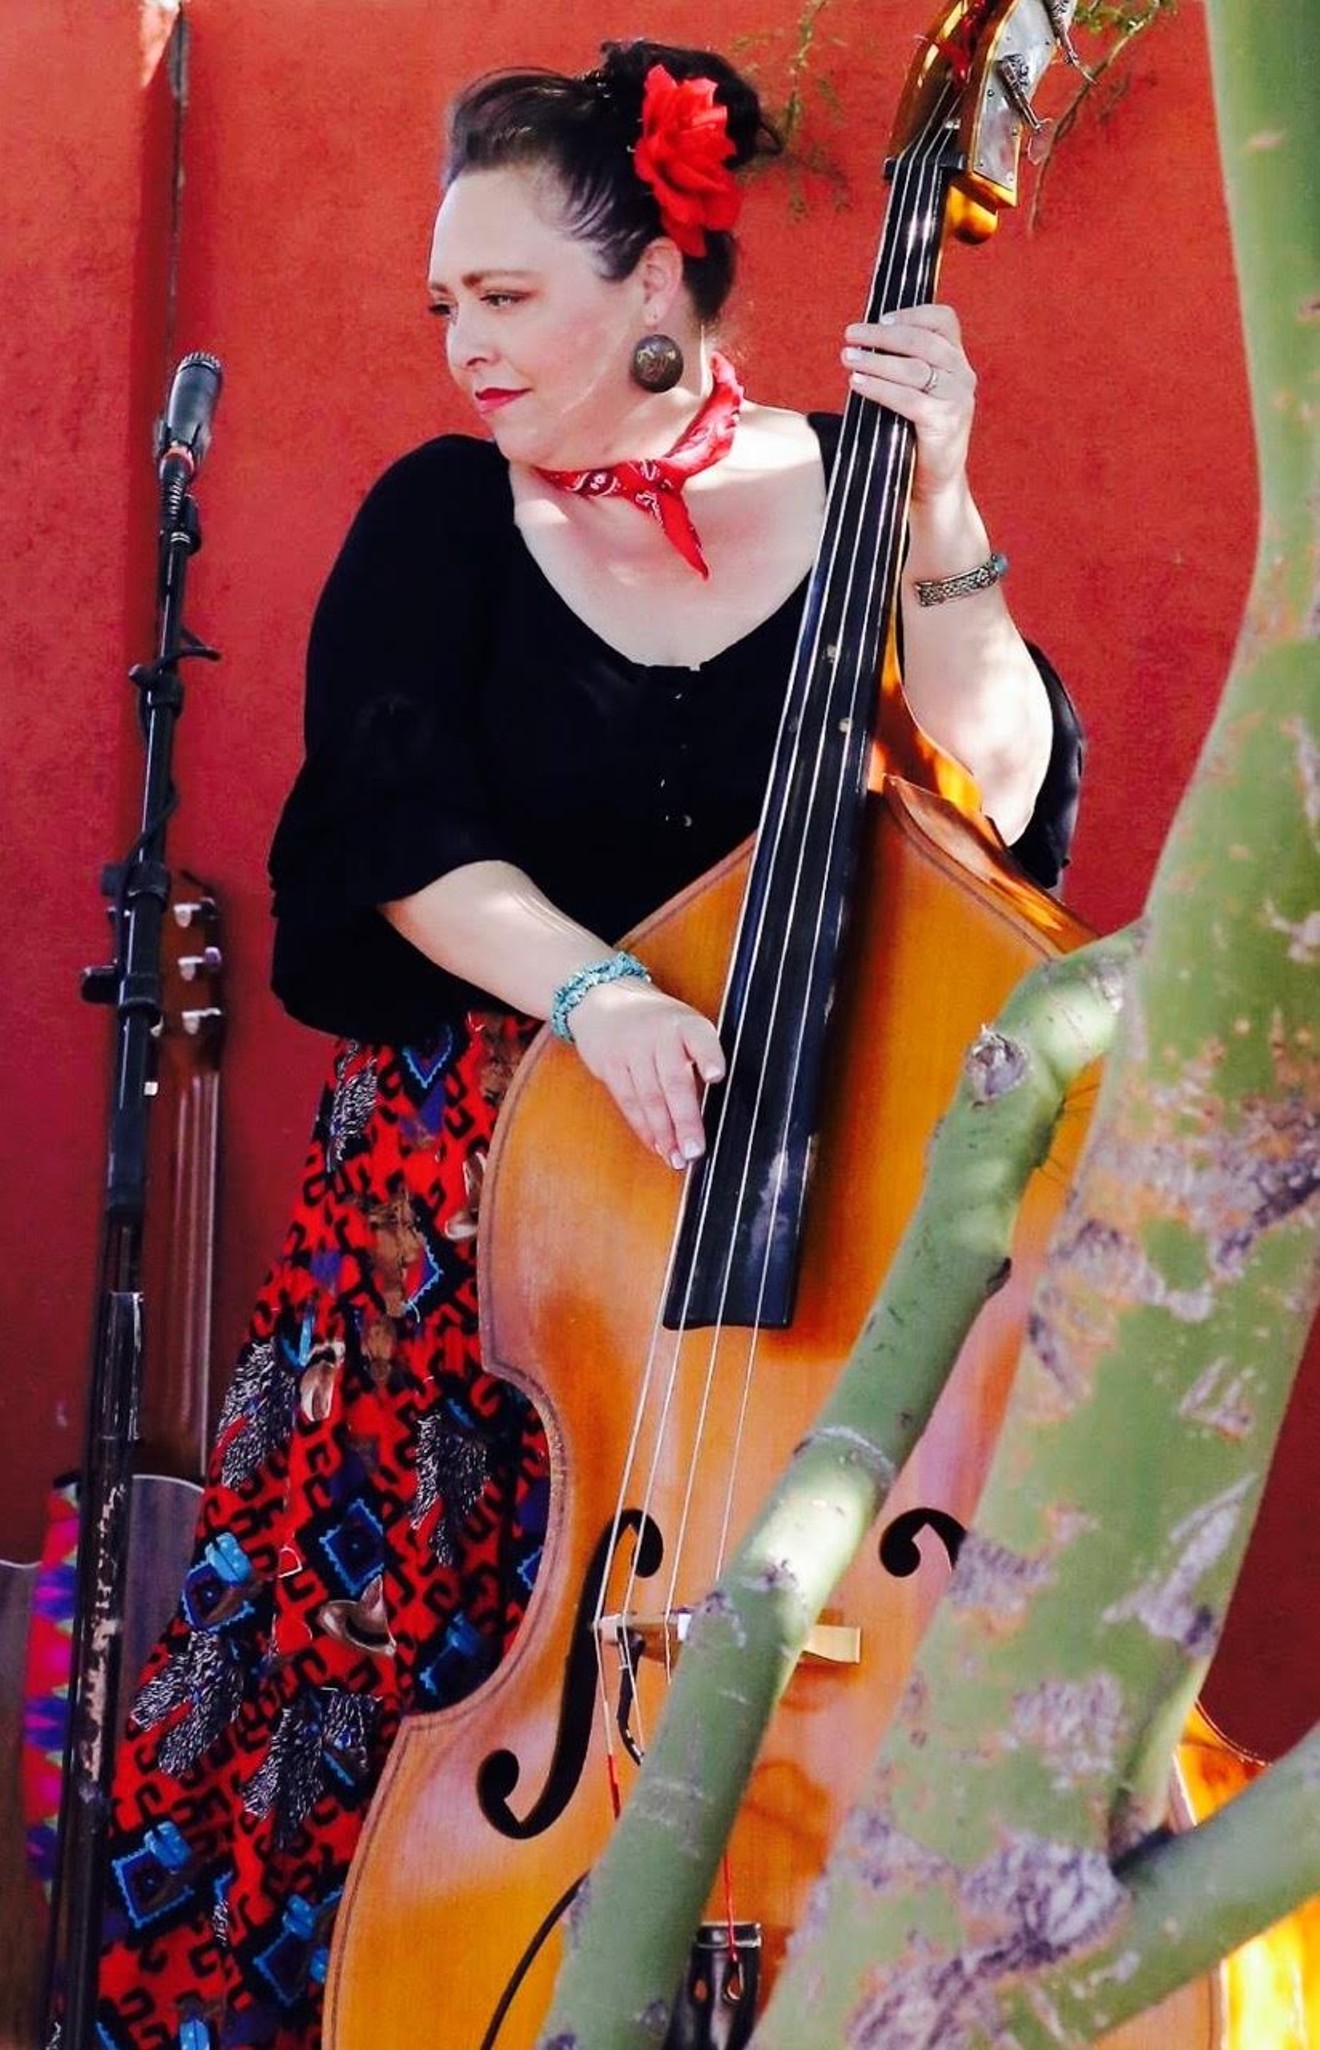 Anamieke and her upright bass.